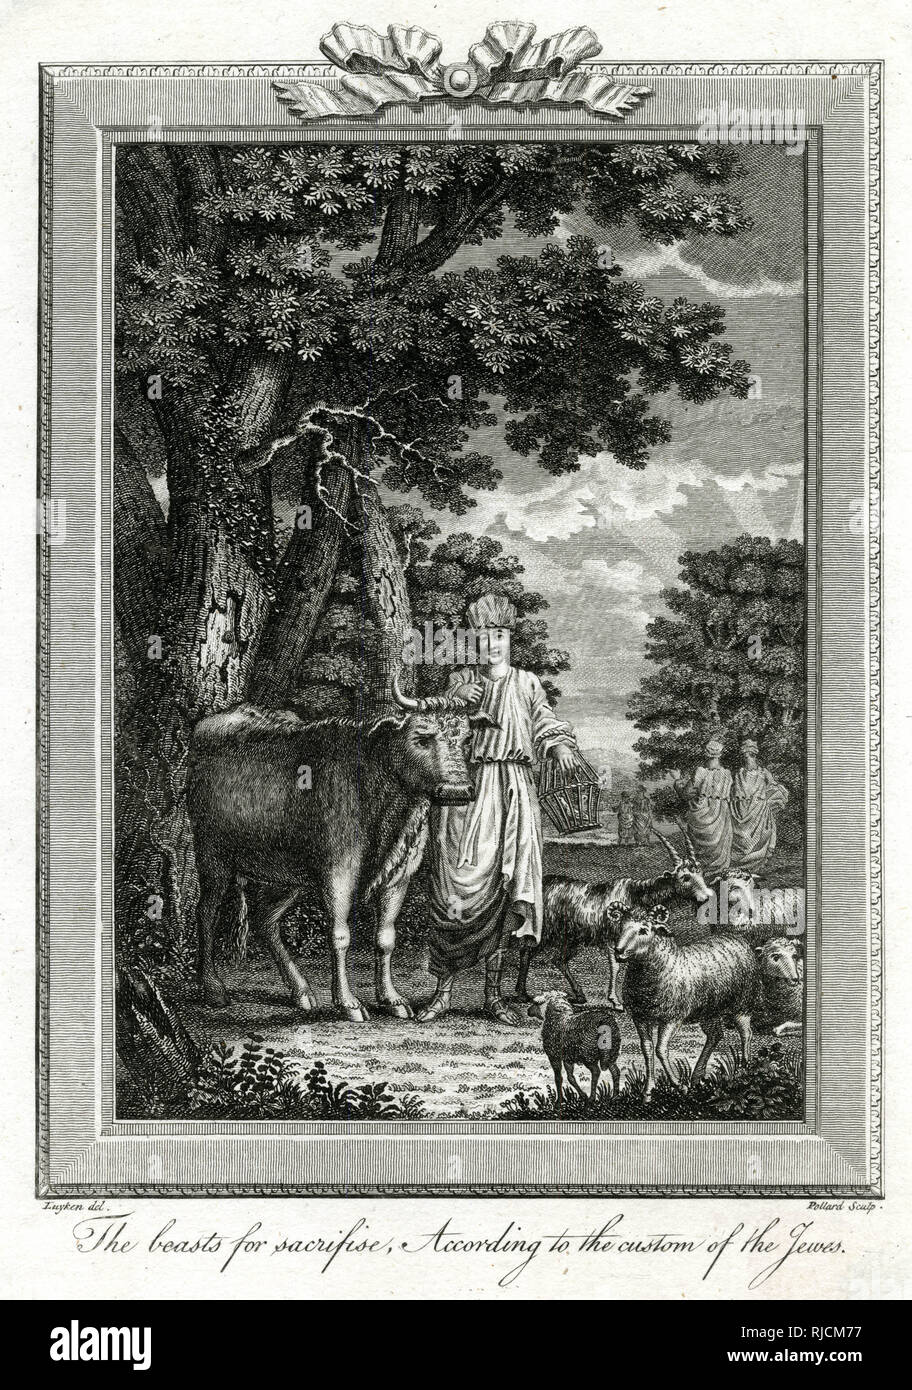 In Judaism, the korban (also known as qorban or corban) refers to a variety of sacrificial offerings commanded in the Torah. Animal sacrifices were common and korban was a kosher animal sacrifice, such as a bull, sheep, goat, or a dove that underwent a traditional Jewish ritual slaughter. This engraving depicts a bull, sheep and goats preparing to be sacrificed. Stock Photo